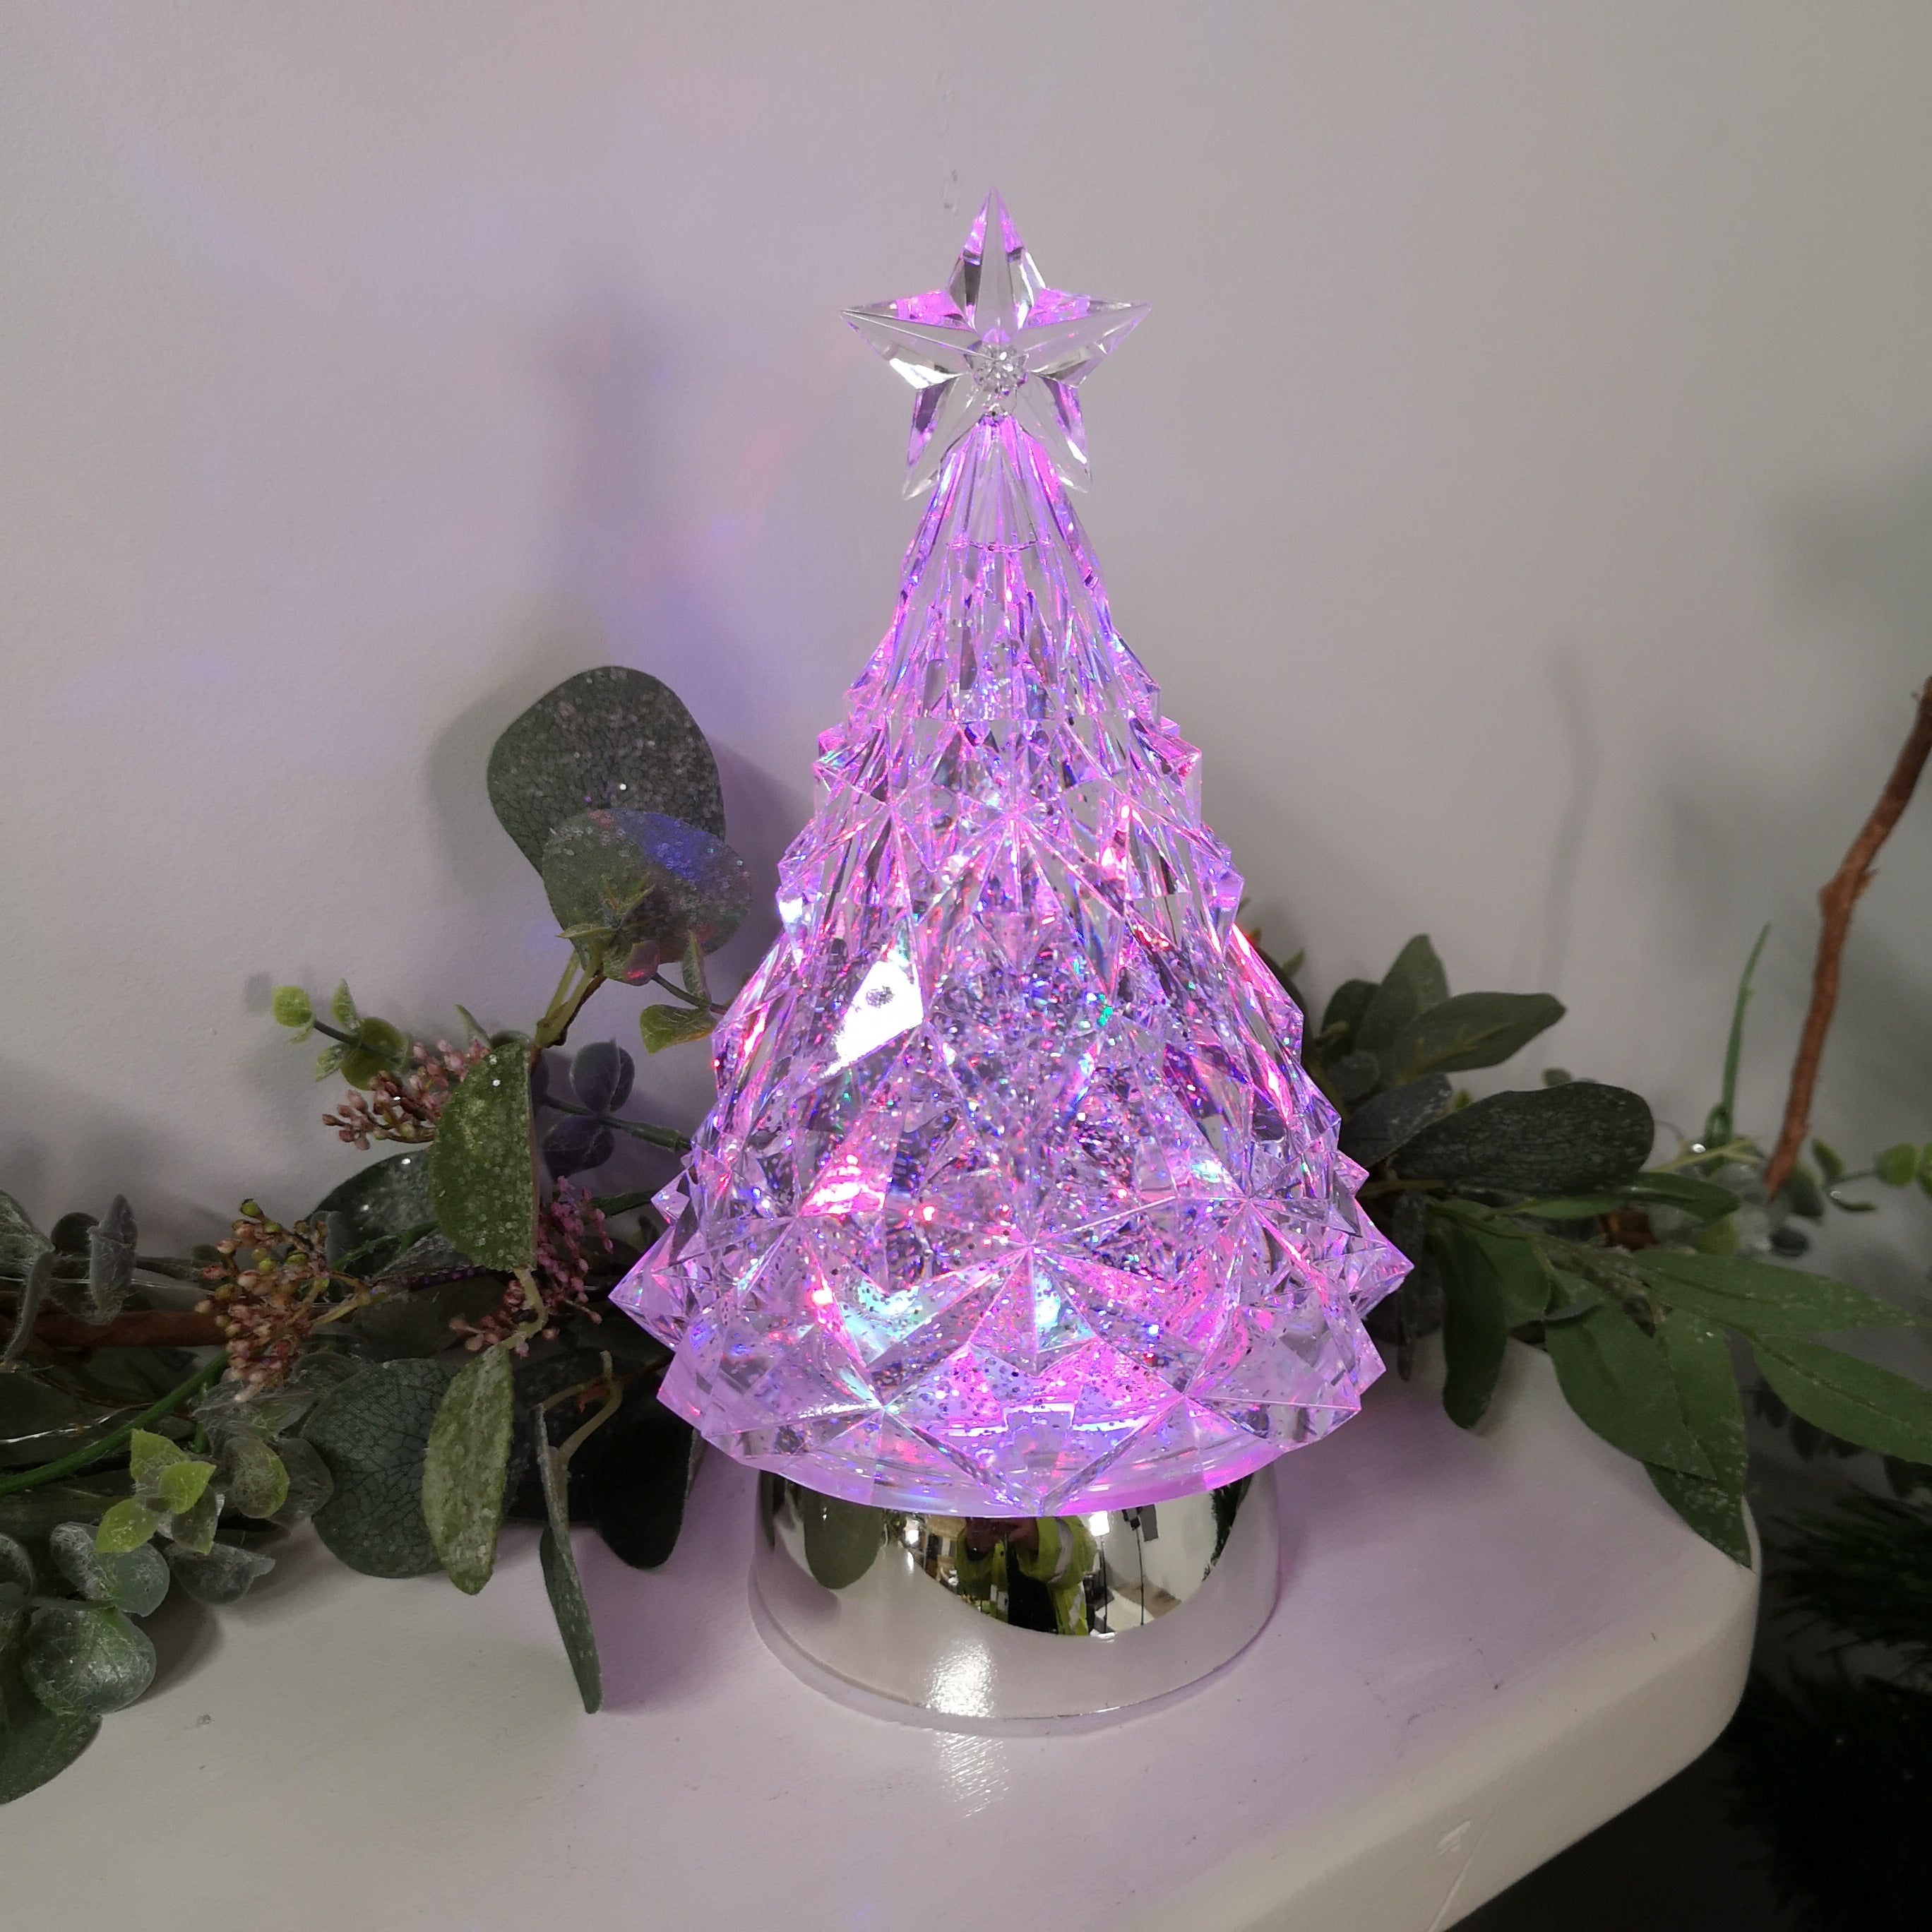 23cm Snowtime LED Christmas Glitter Water Spinner Colour Changing Tree